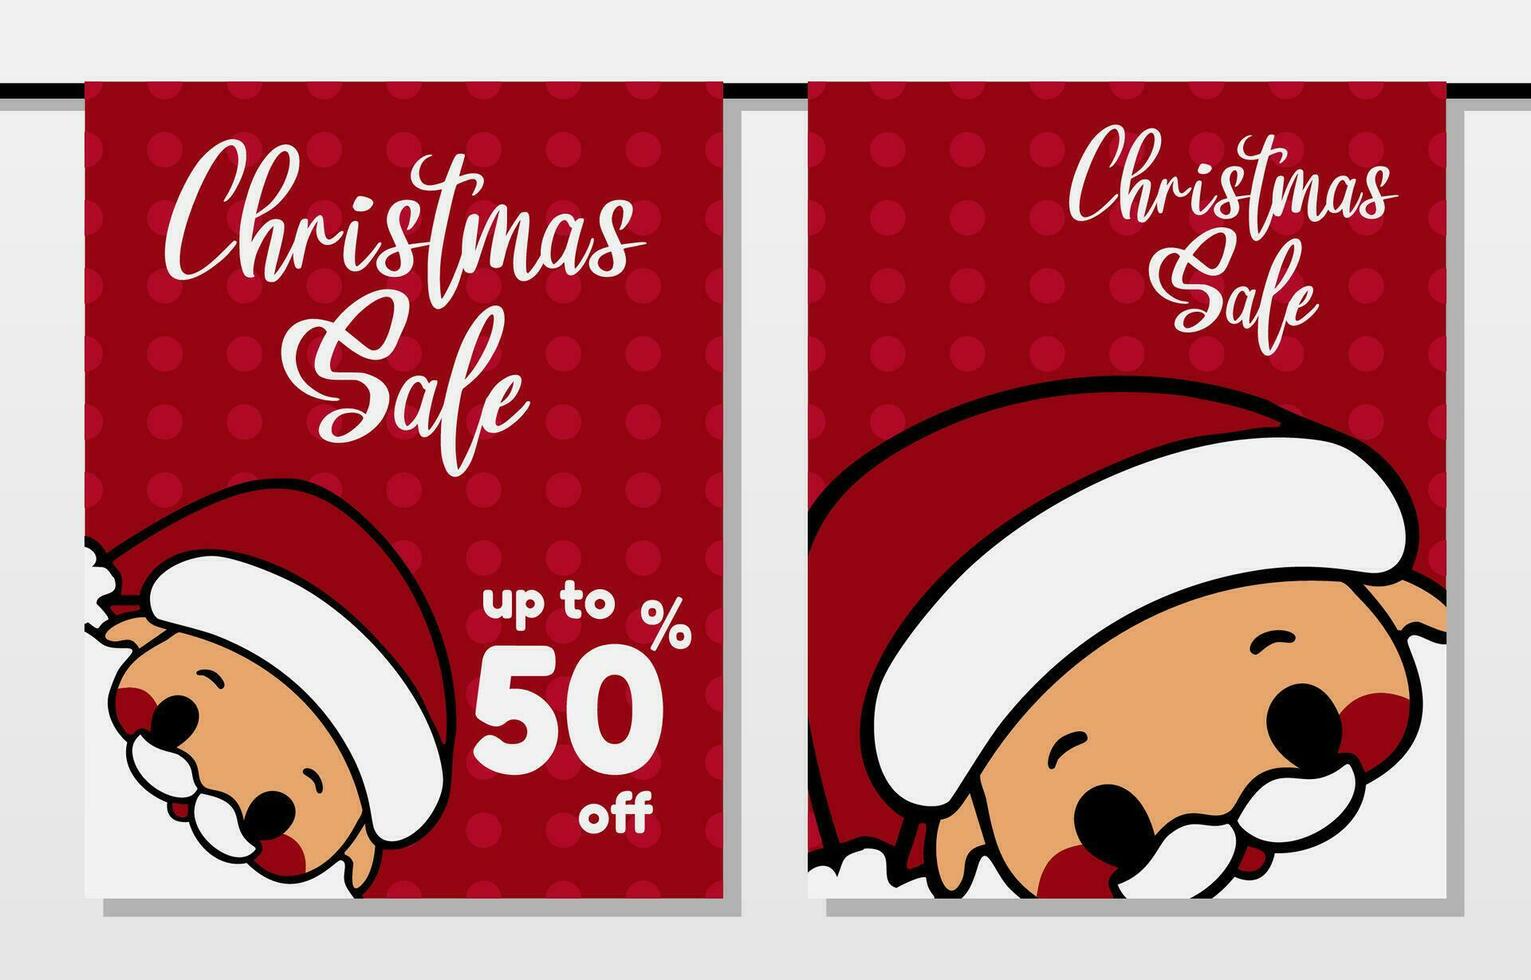 Christmas sale up to 50 percent off with noel hanging store decoration for holiday offer ads vector